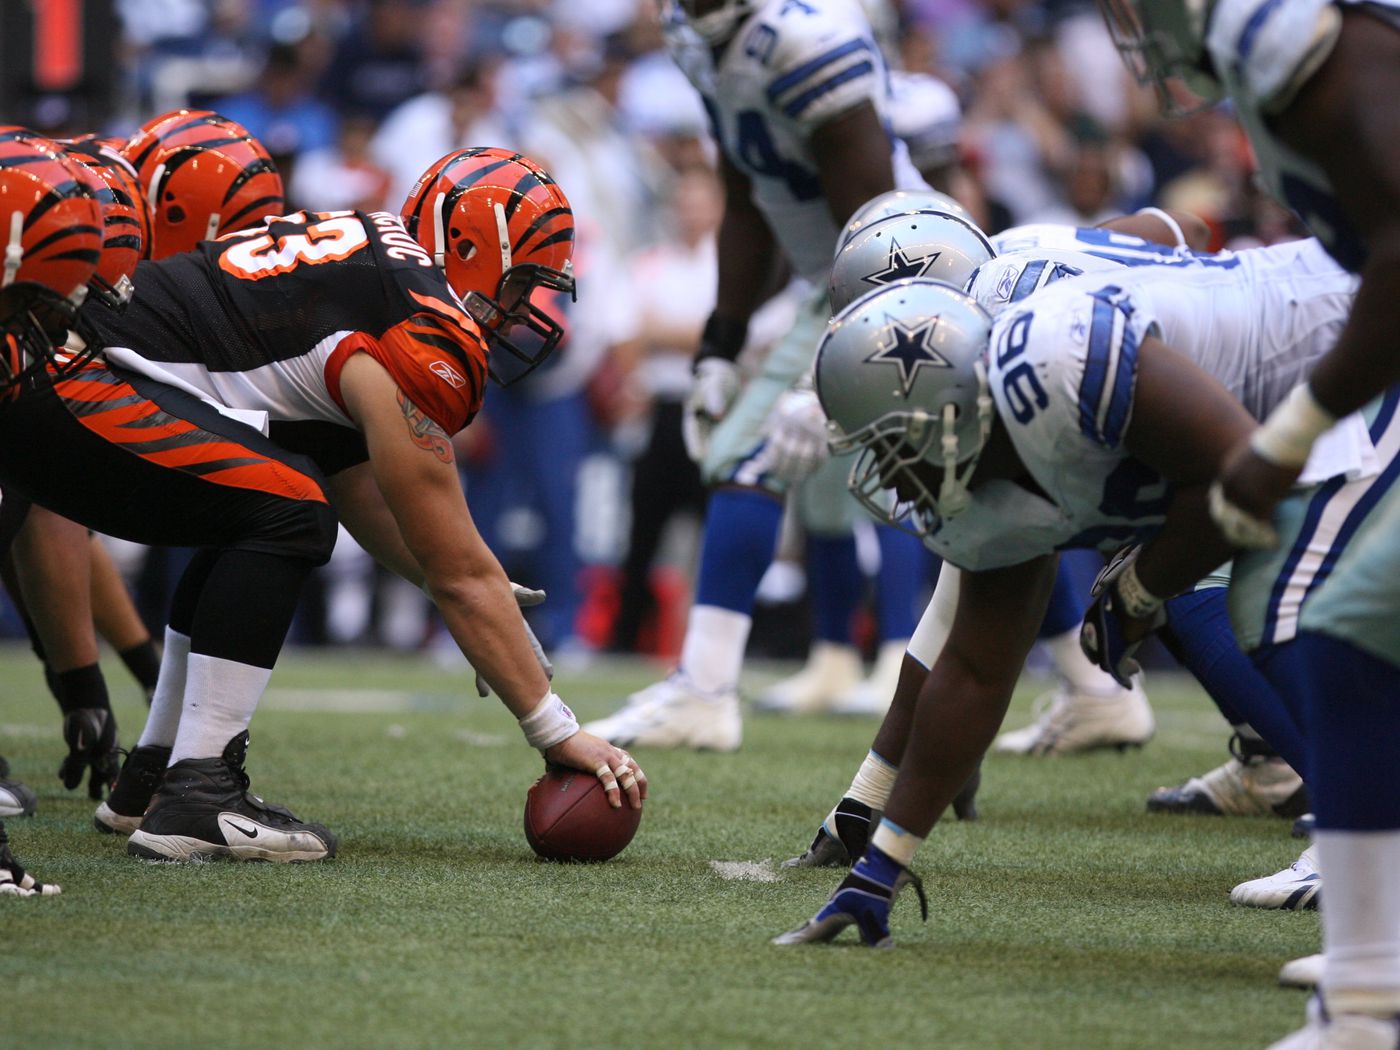 How to watch and stream Cowboys vs Bengals: Live blog for NFL Week